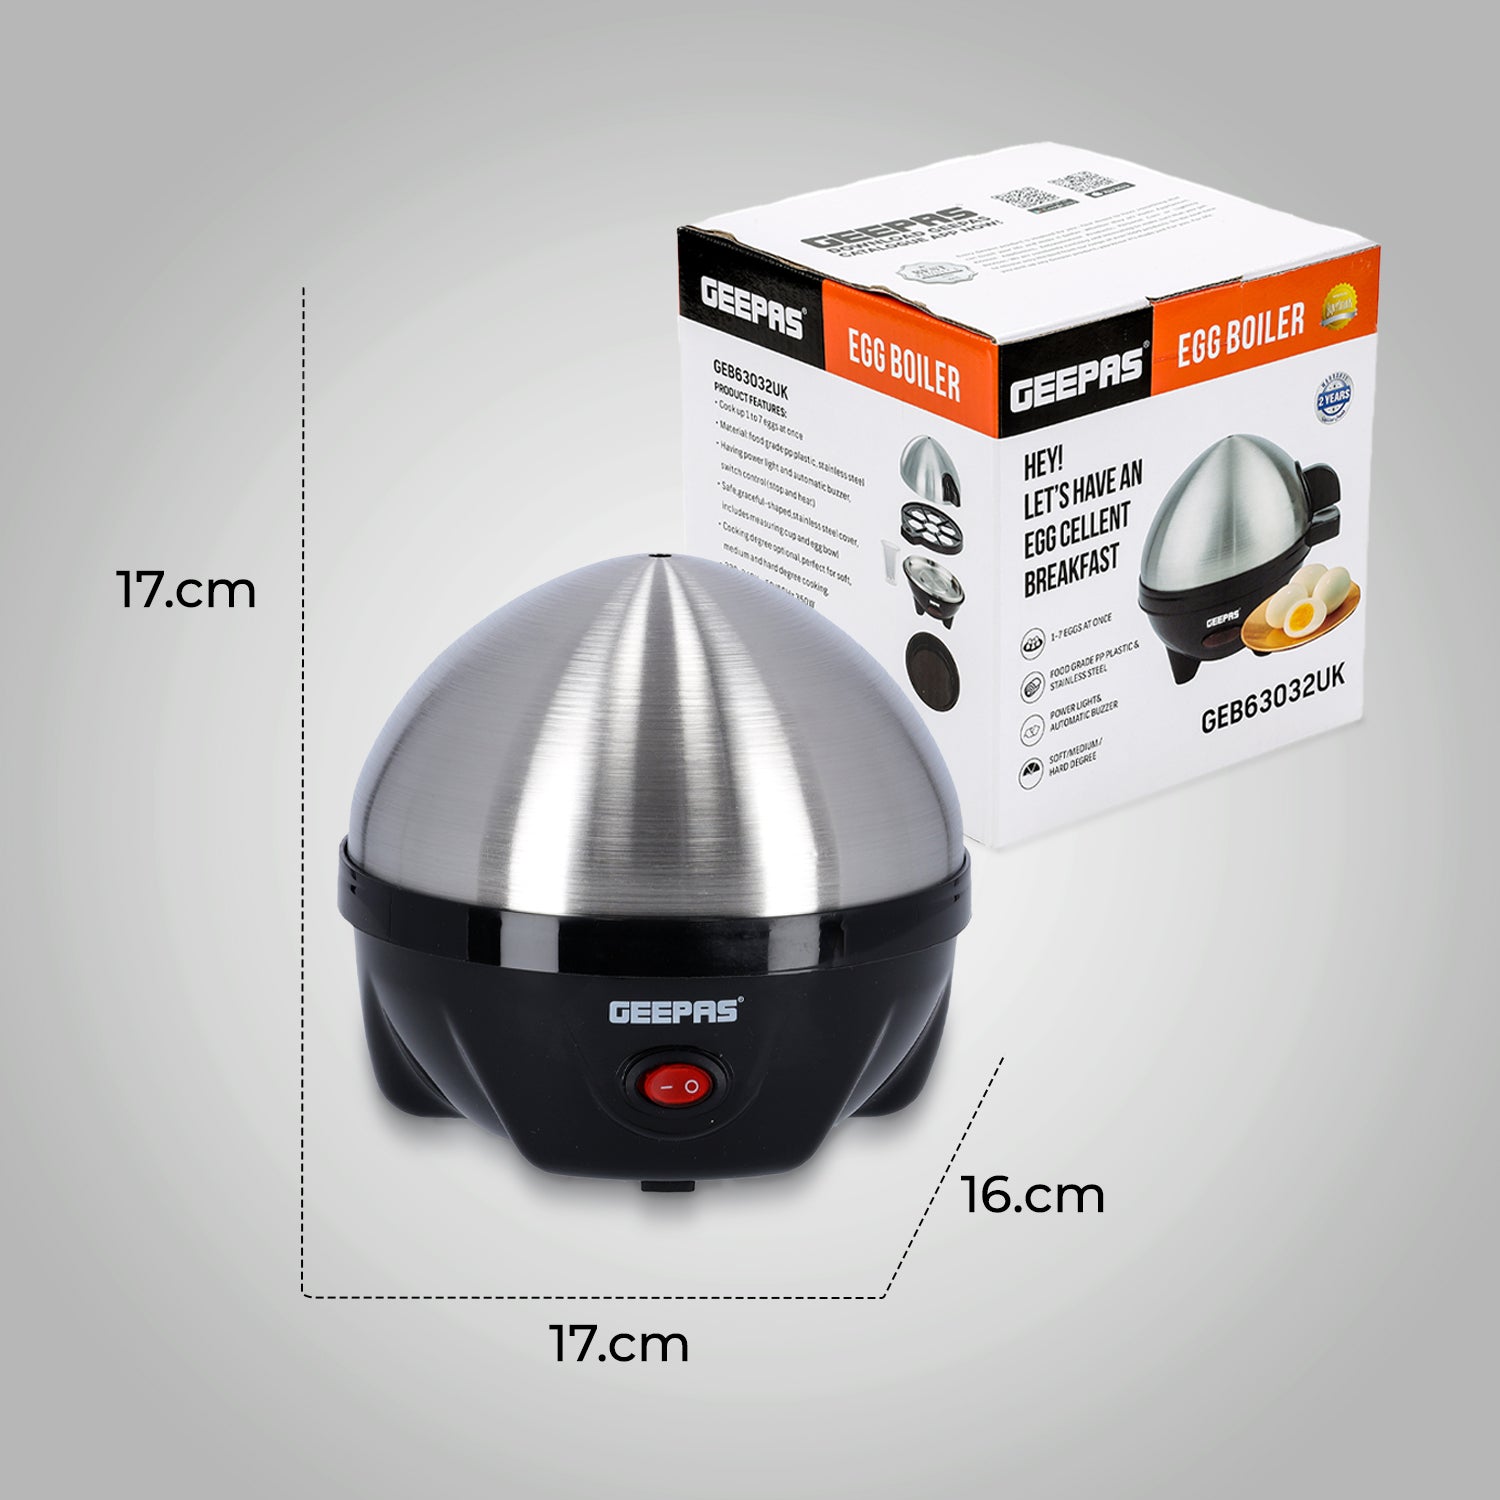 Egg Cooker, Electric Egg Boiler Made of PP and Stainless Steel